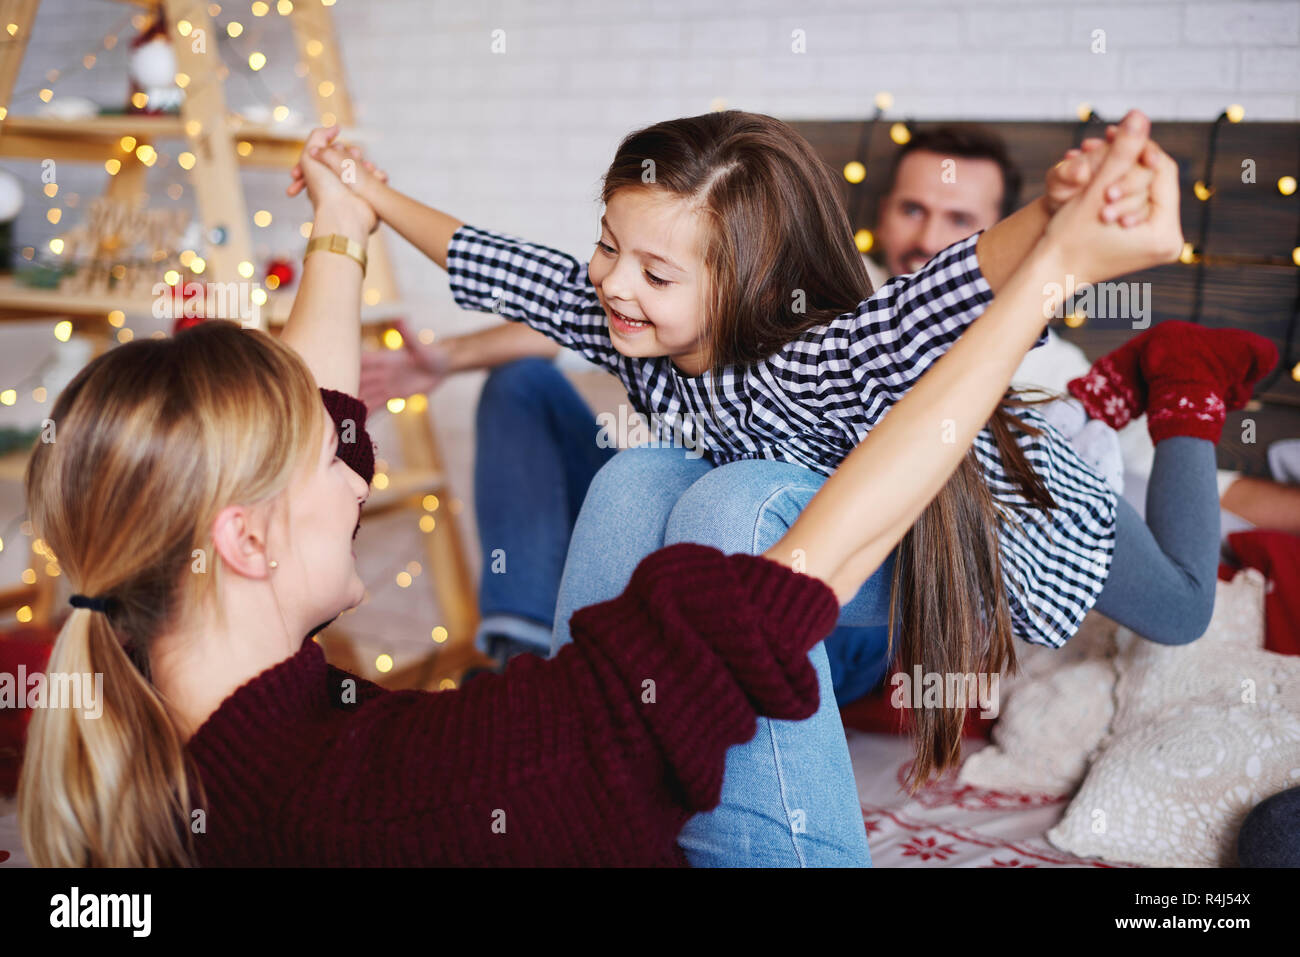 Family spending christmas time together in bed Stock Photo